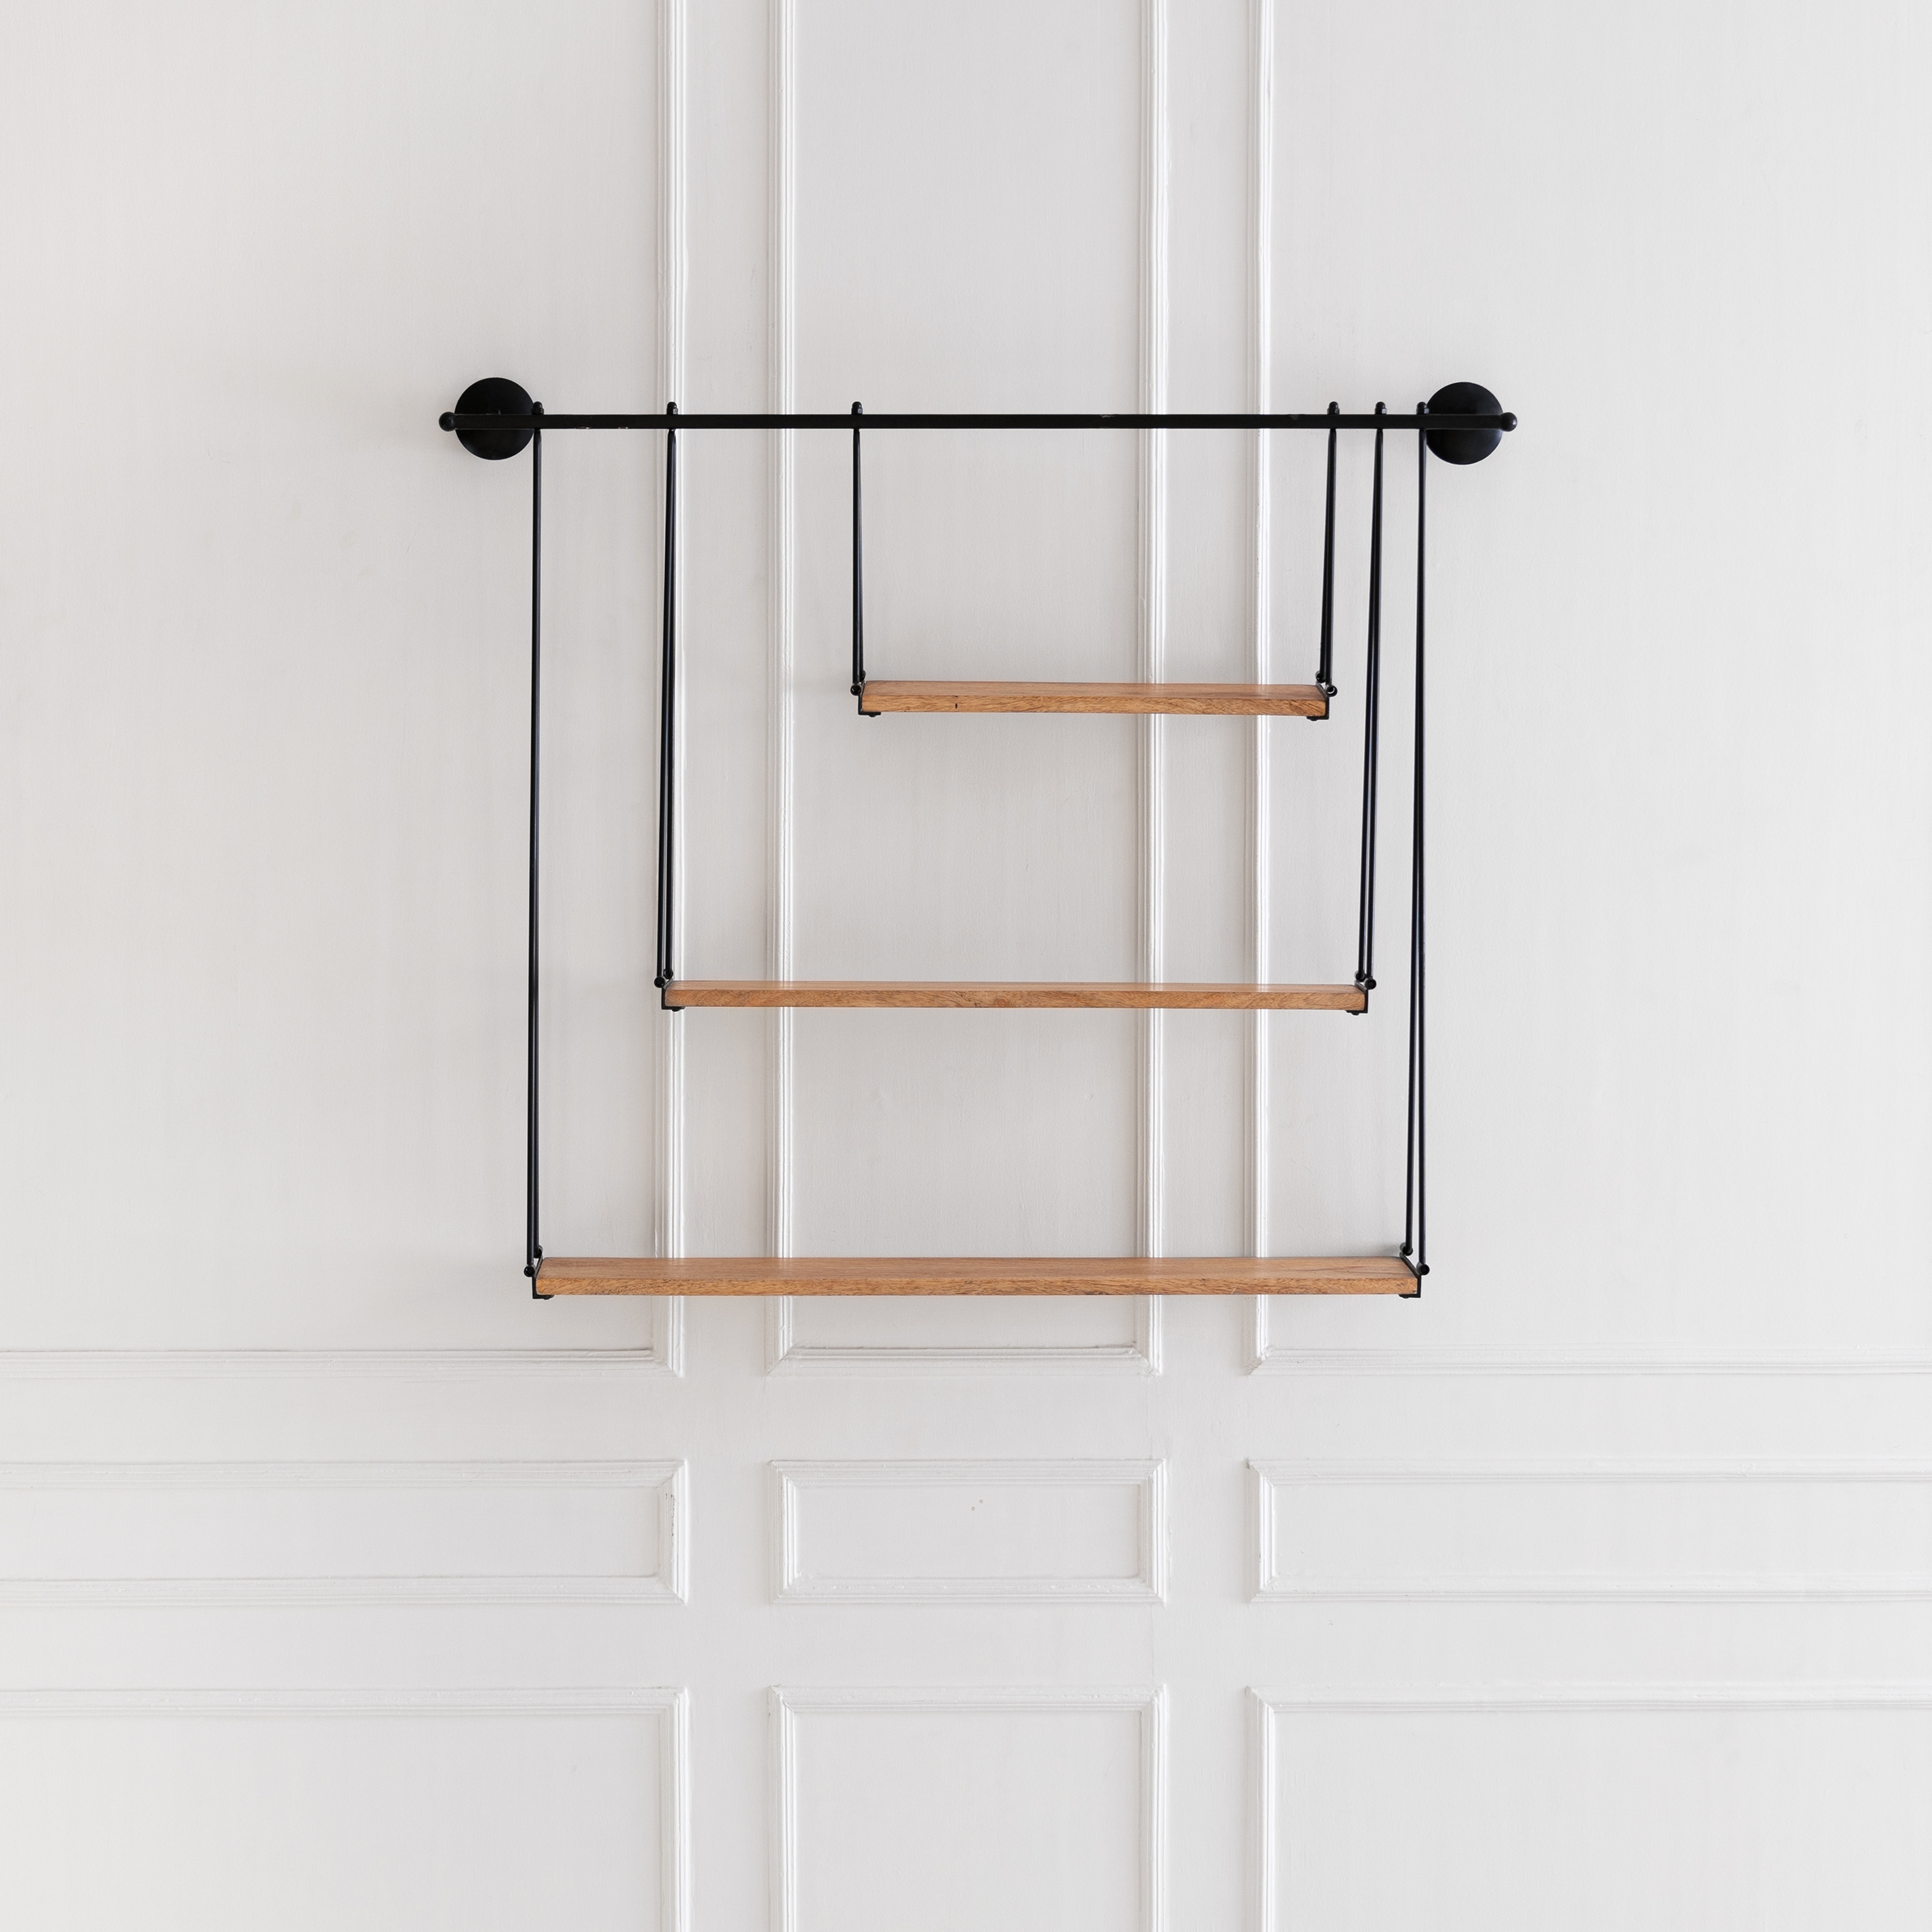 https://ak1.ostkcdn.com/images/products/is/images/direct/9abd193e24d8de28c23fa6a6c97f53ba0216ff60/MH-London-Luna-Three-Tier-Suspended-Wall-Shelf.jpg